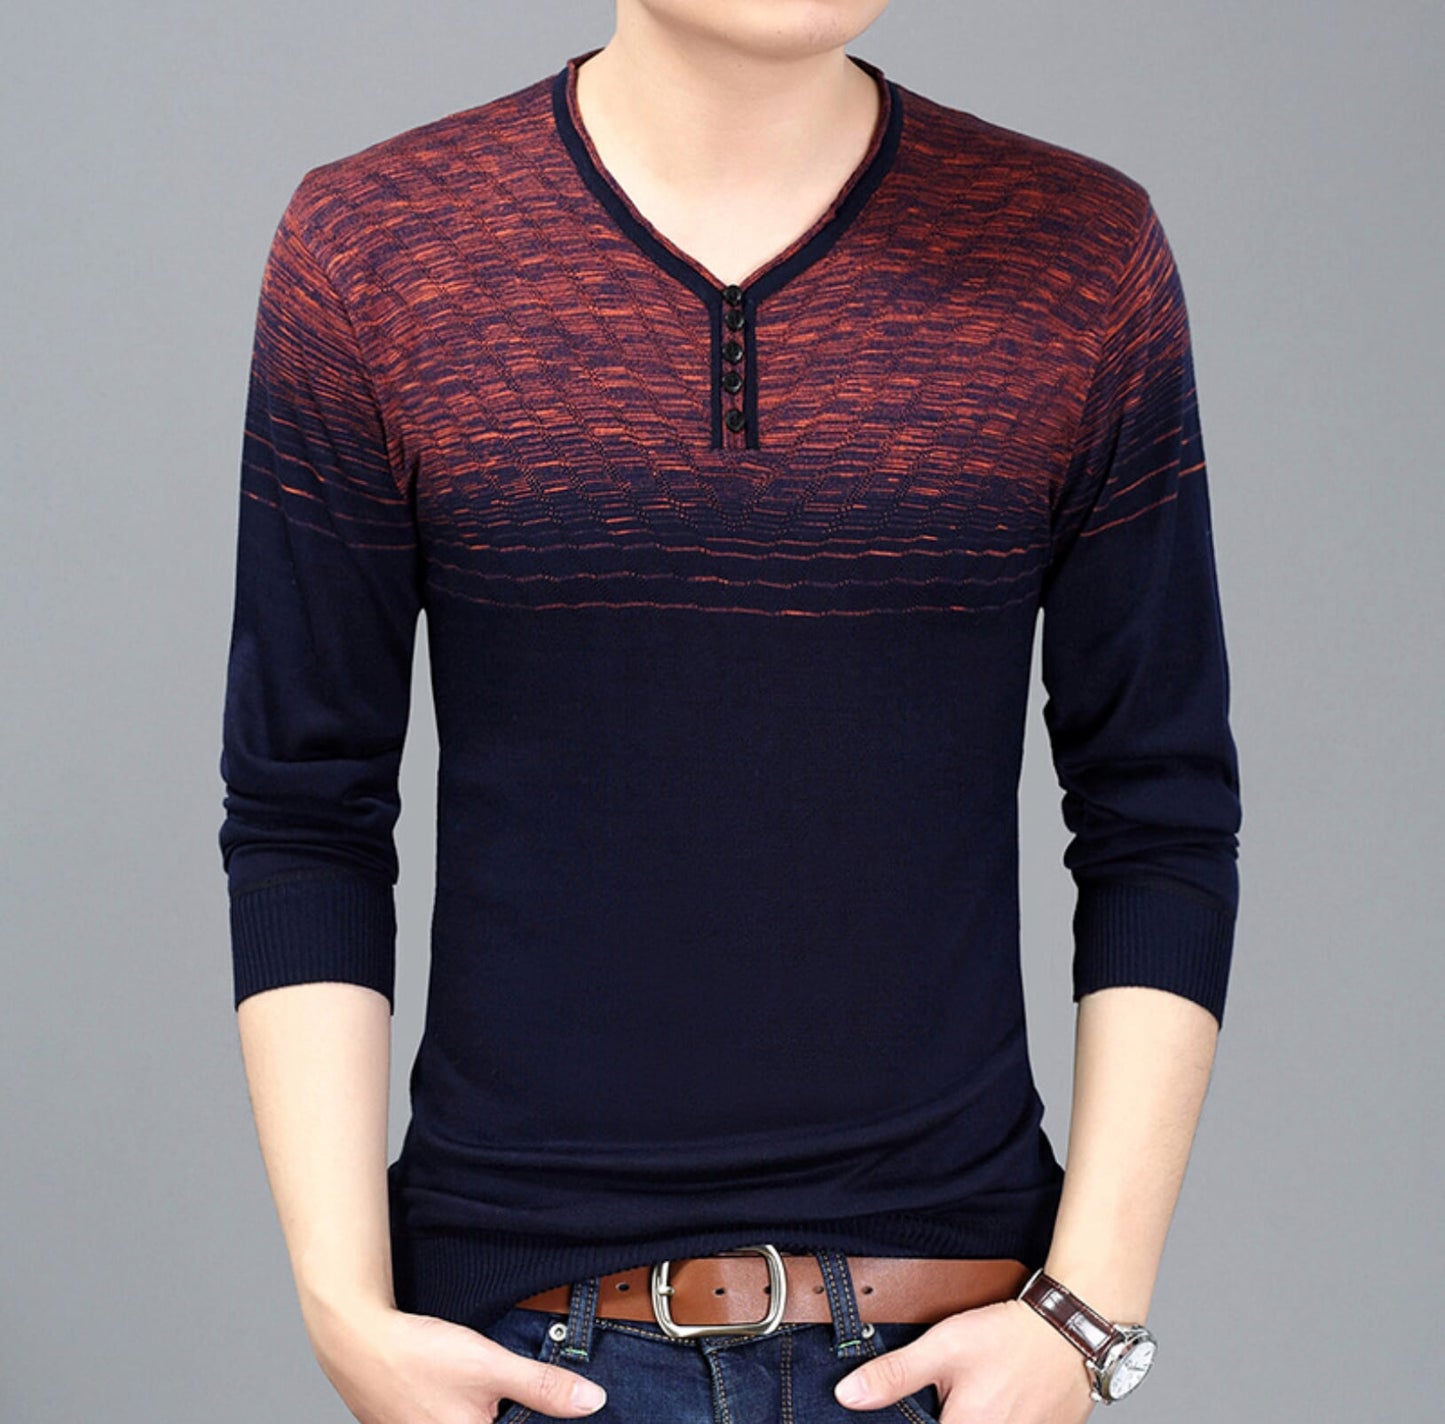 Mens Gradient Sweater - AmtifyDirect